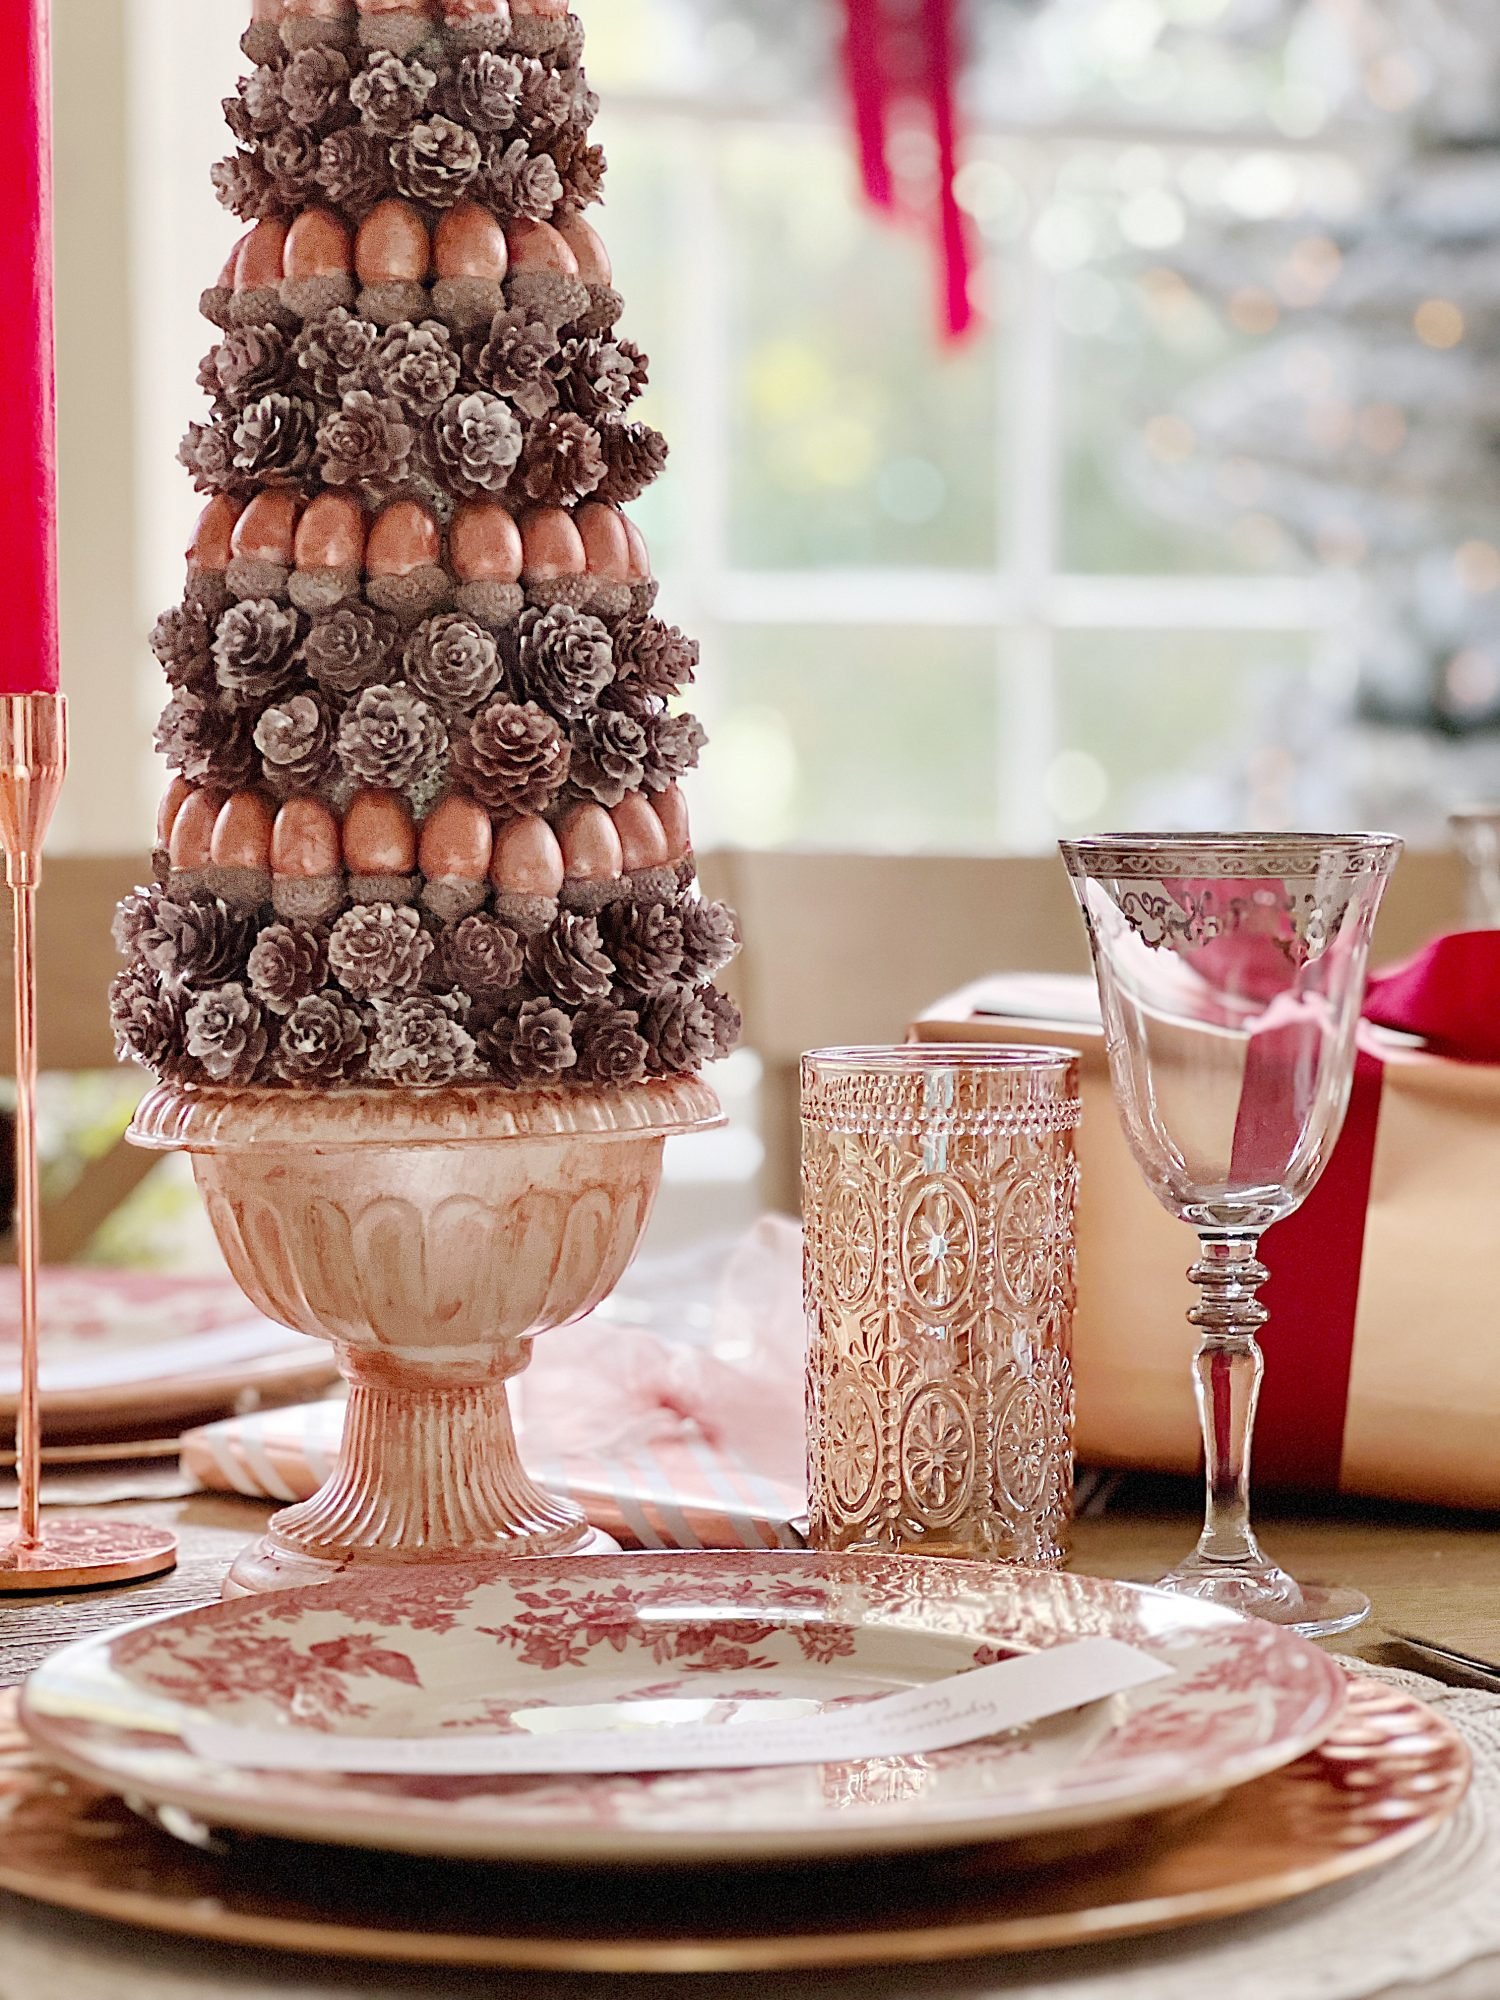 A Christmas table set in cranberry and rose gold colors with a DIY tree, cranberry and white plates, amber and clear glasses, rose gold chargers, and wrapped packages.